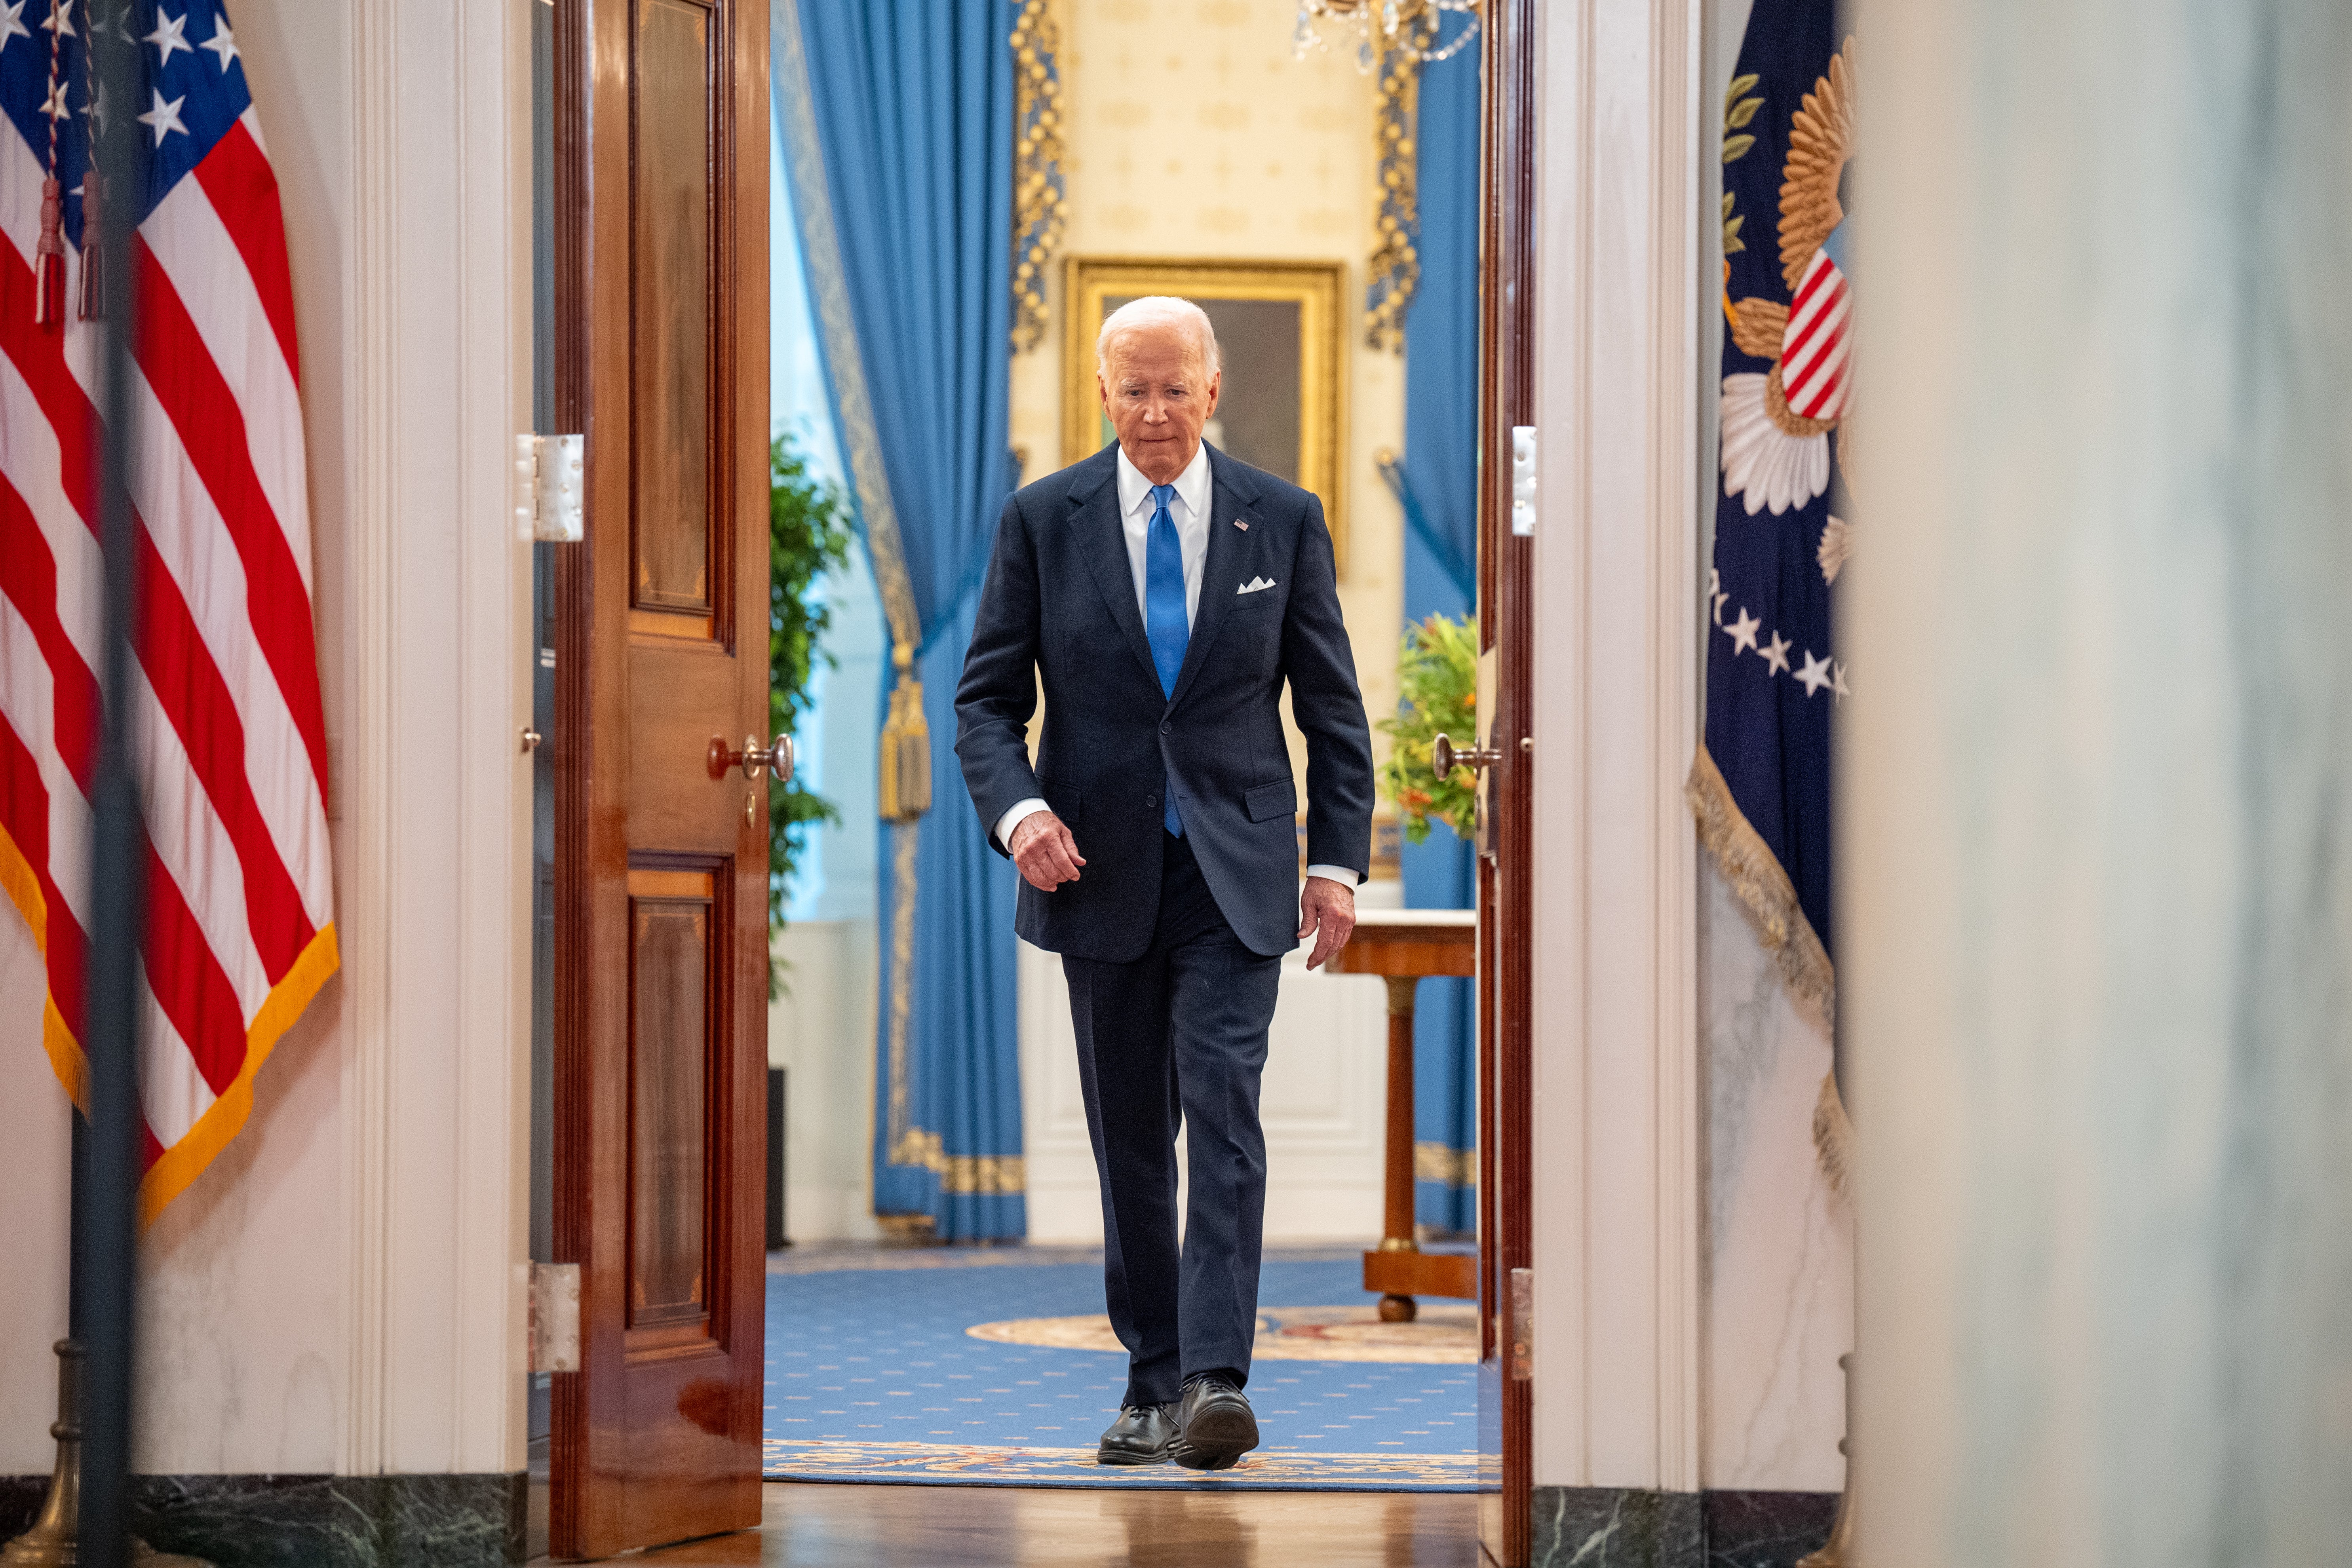 President Joe Biden prepares to deliver remarks at the White House on 1 July